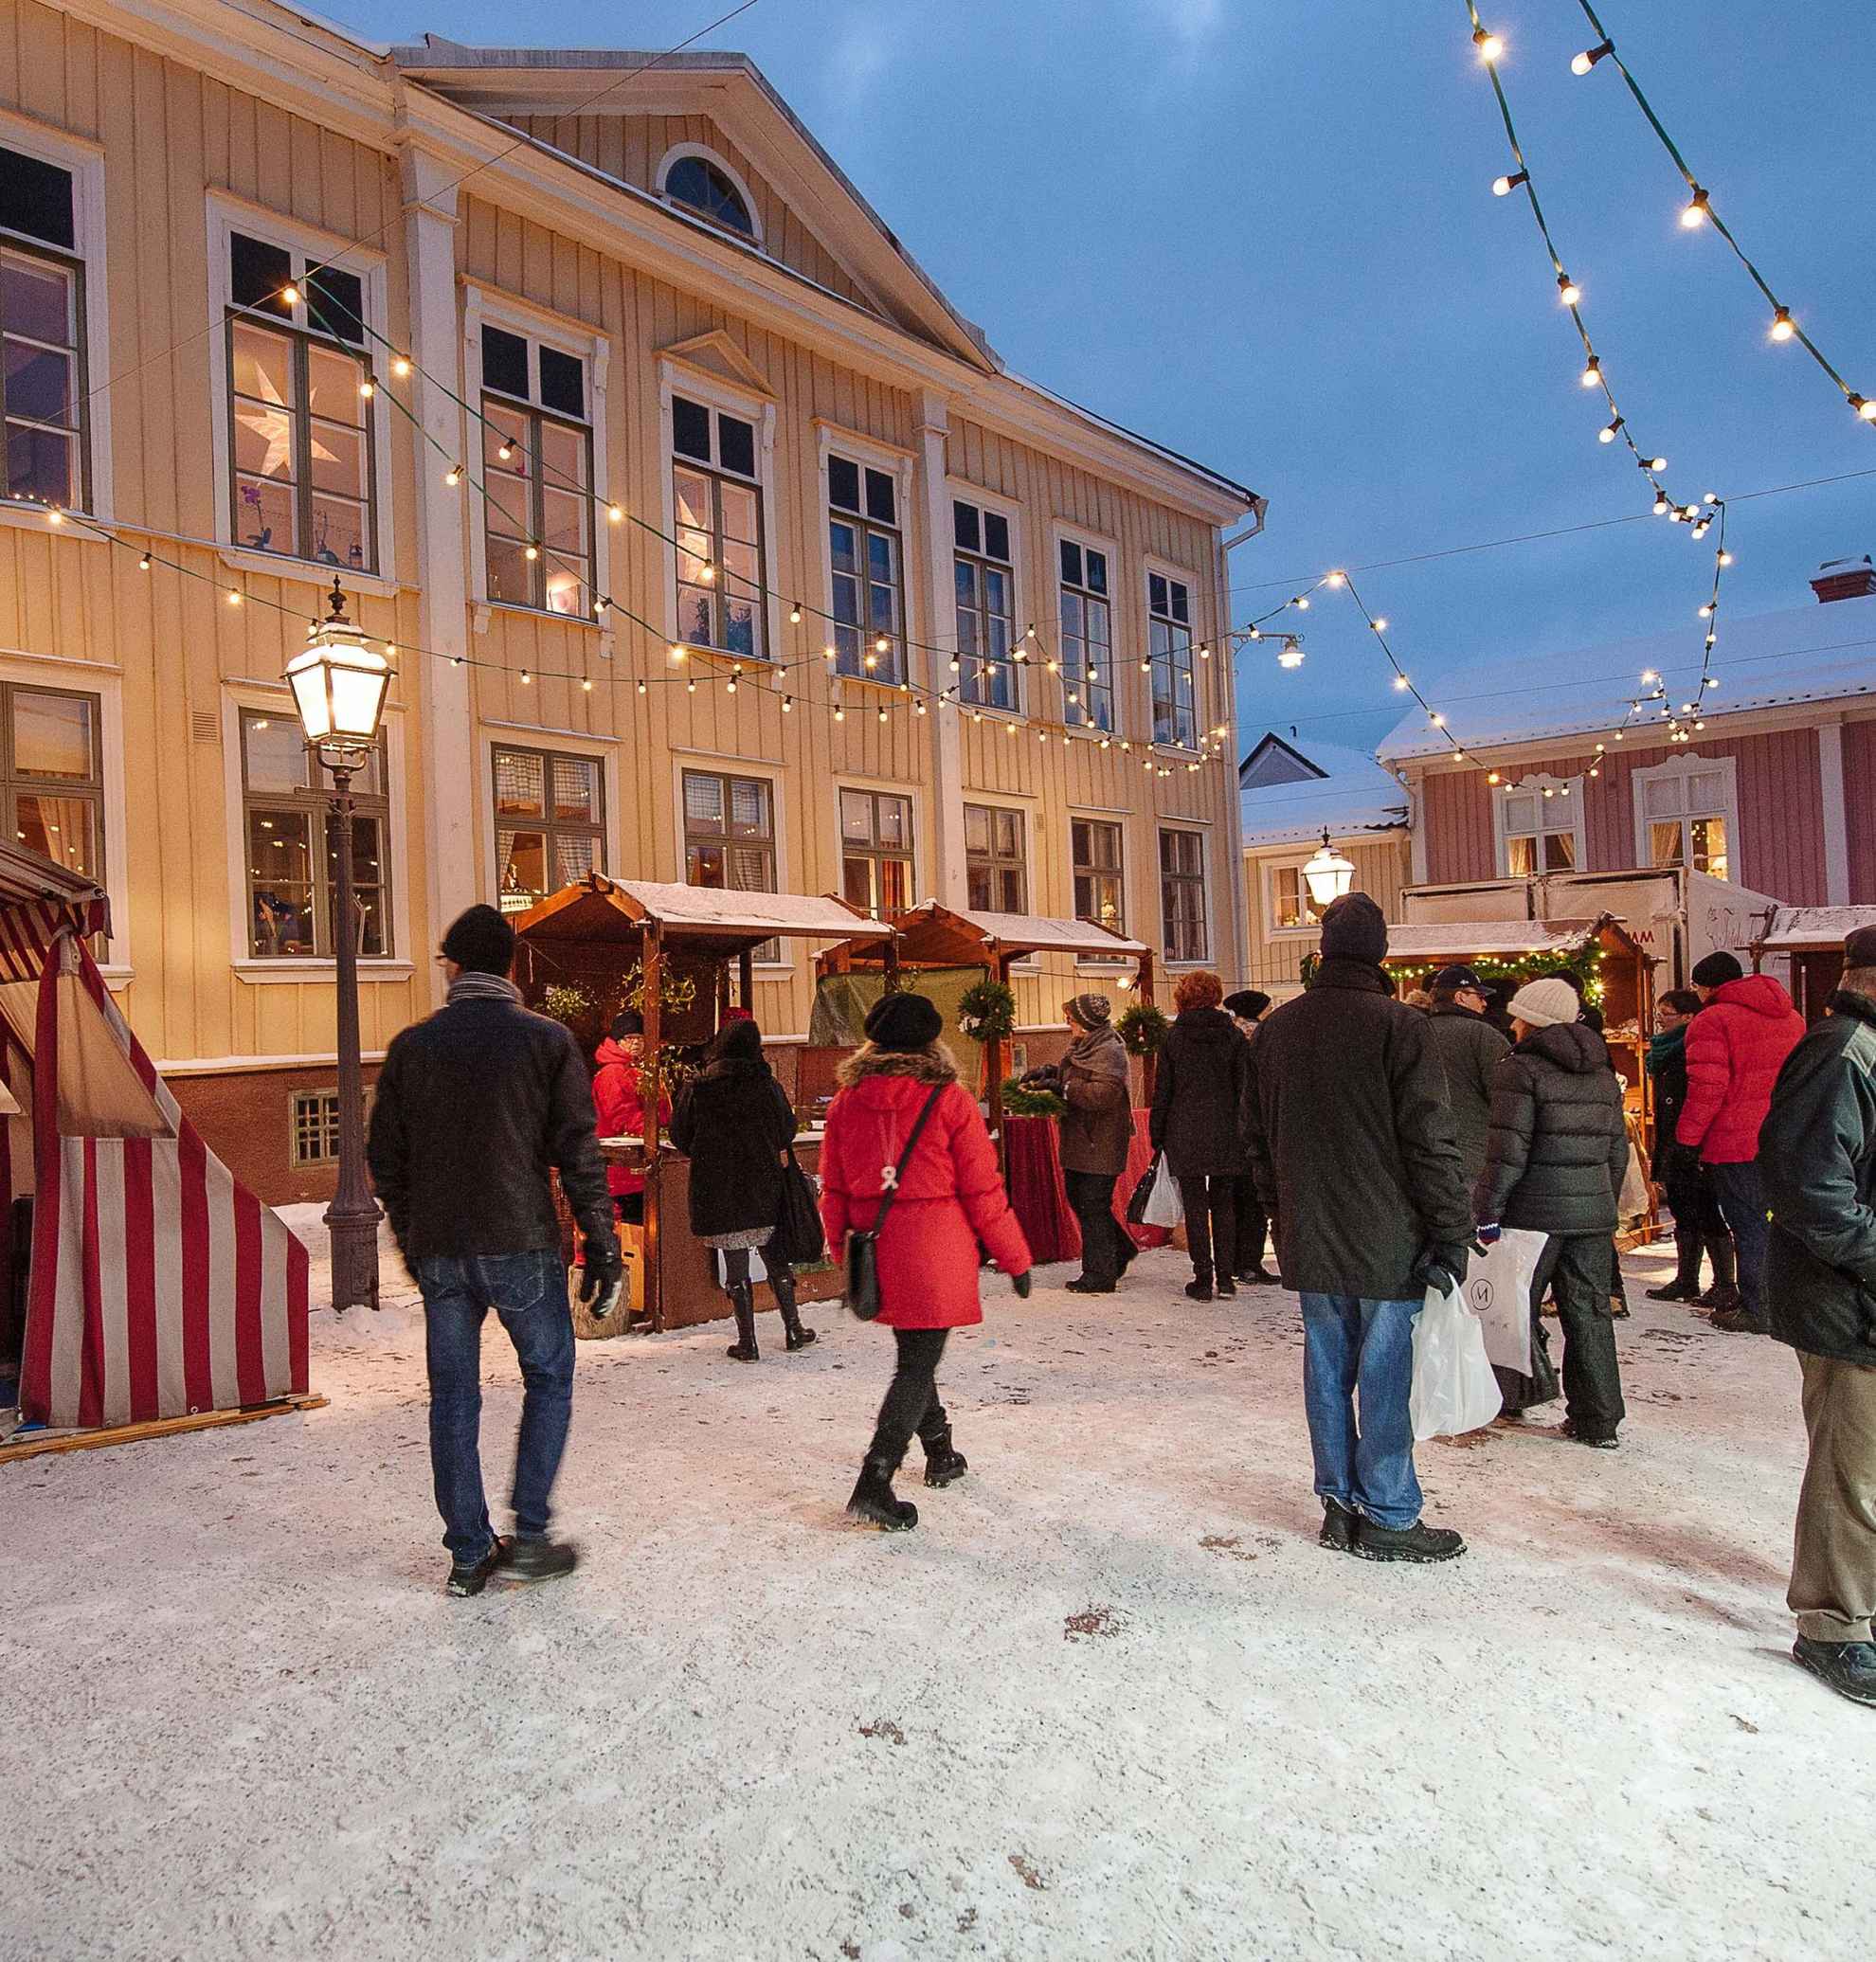 People are walking around the stables in front of a yellow wooden building at Eksjö Christmas market. It's getting dark, lights decorations have been lit and there's snow on the ground.